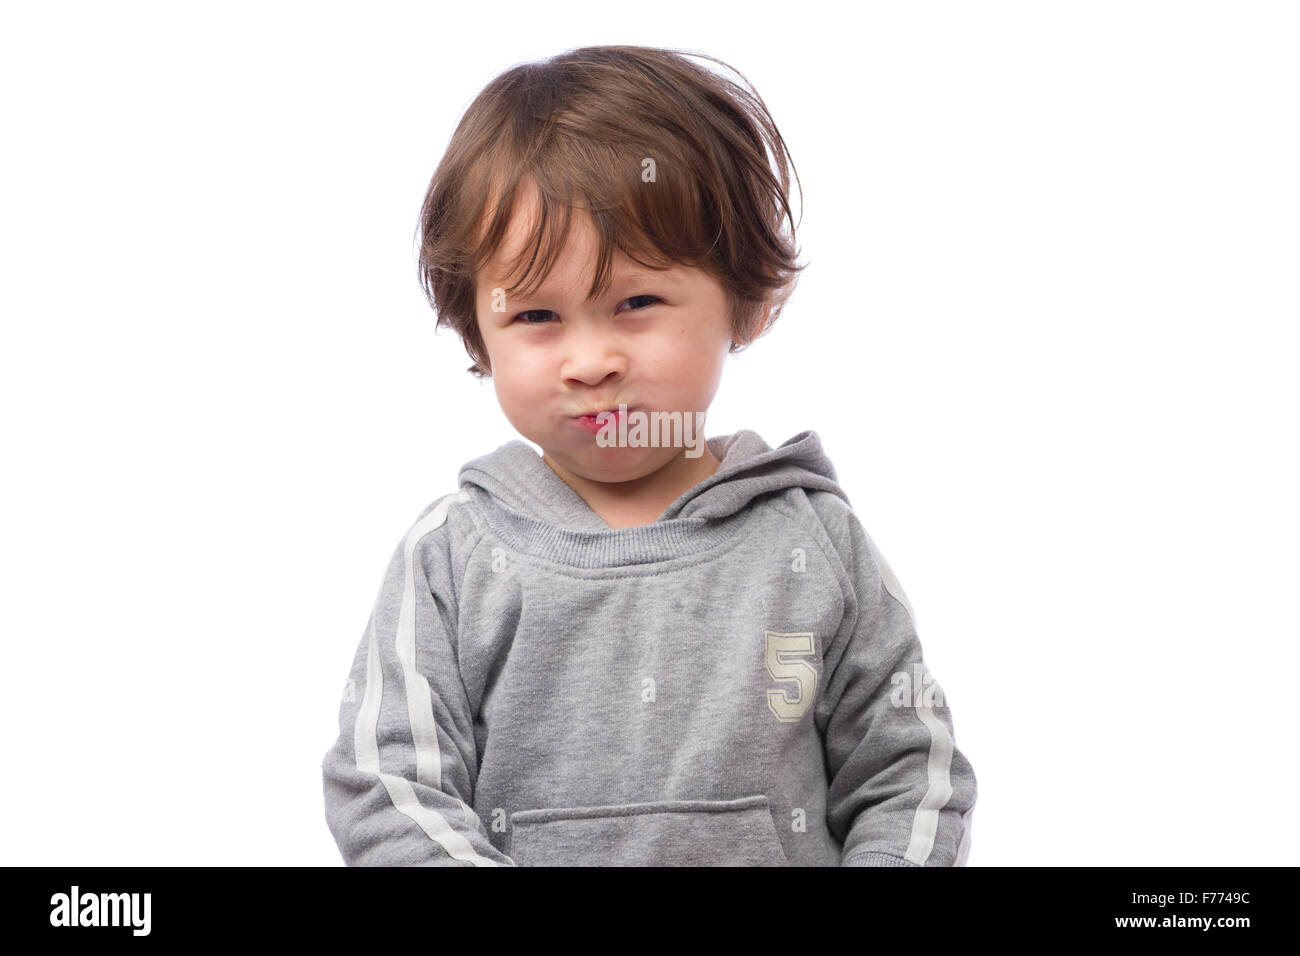 A cute 3 year old boy with an angry expression on a white background. Stock Photo